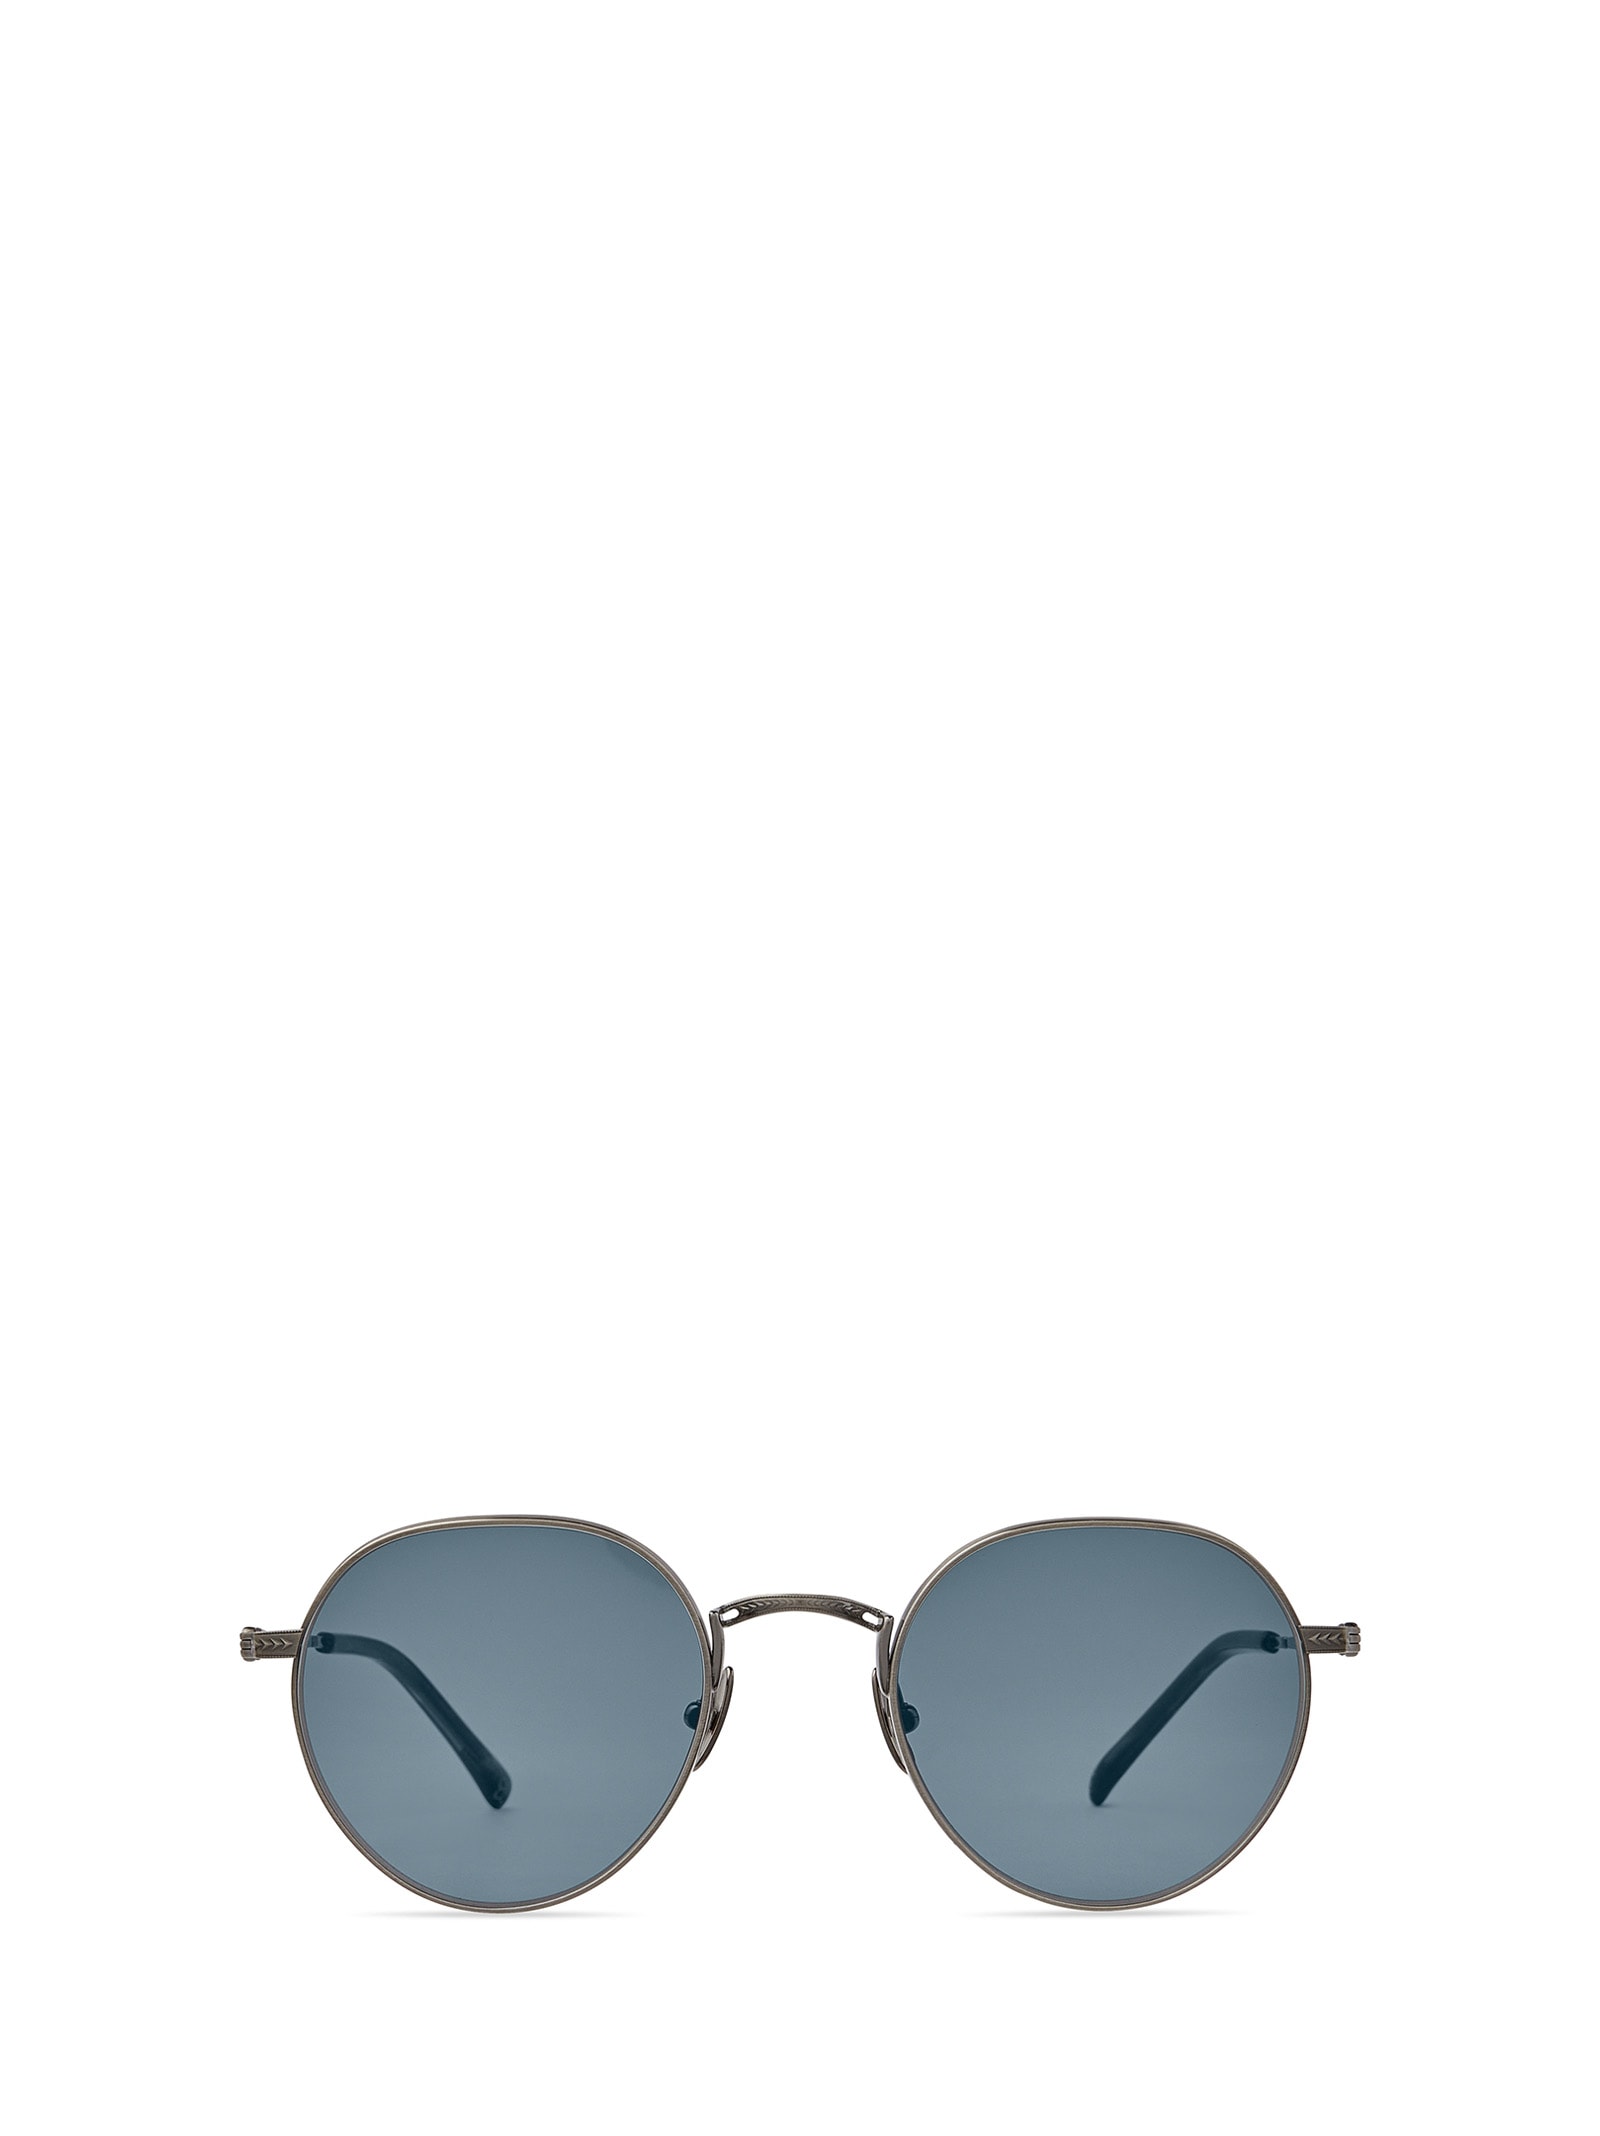 Hachi S Pewter-matte Coldwater/semi-flat Presidential Blue Sunglasses